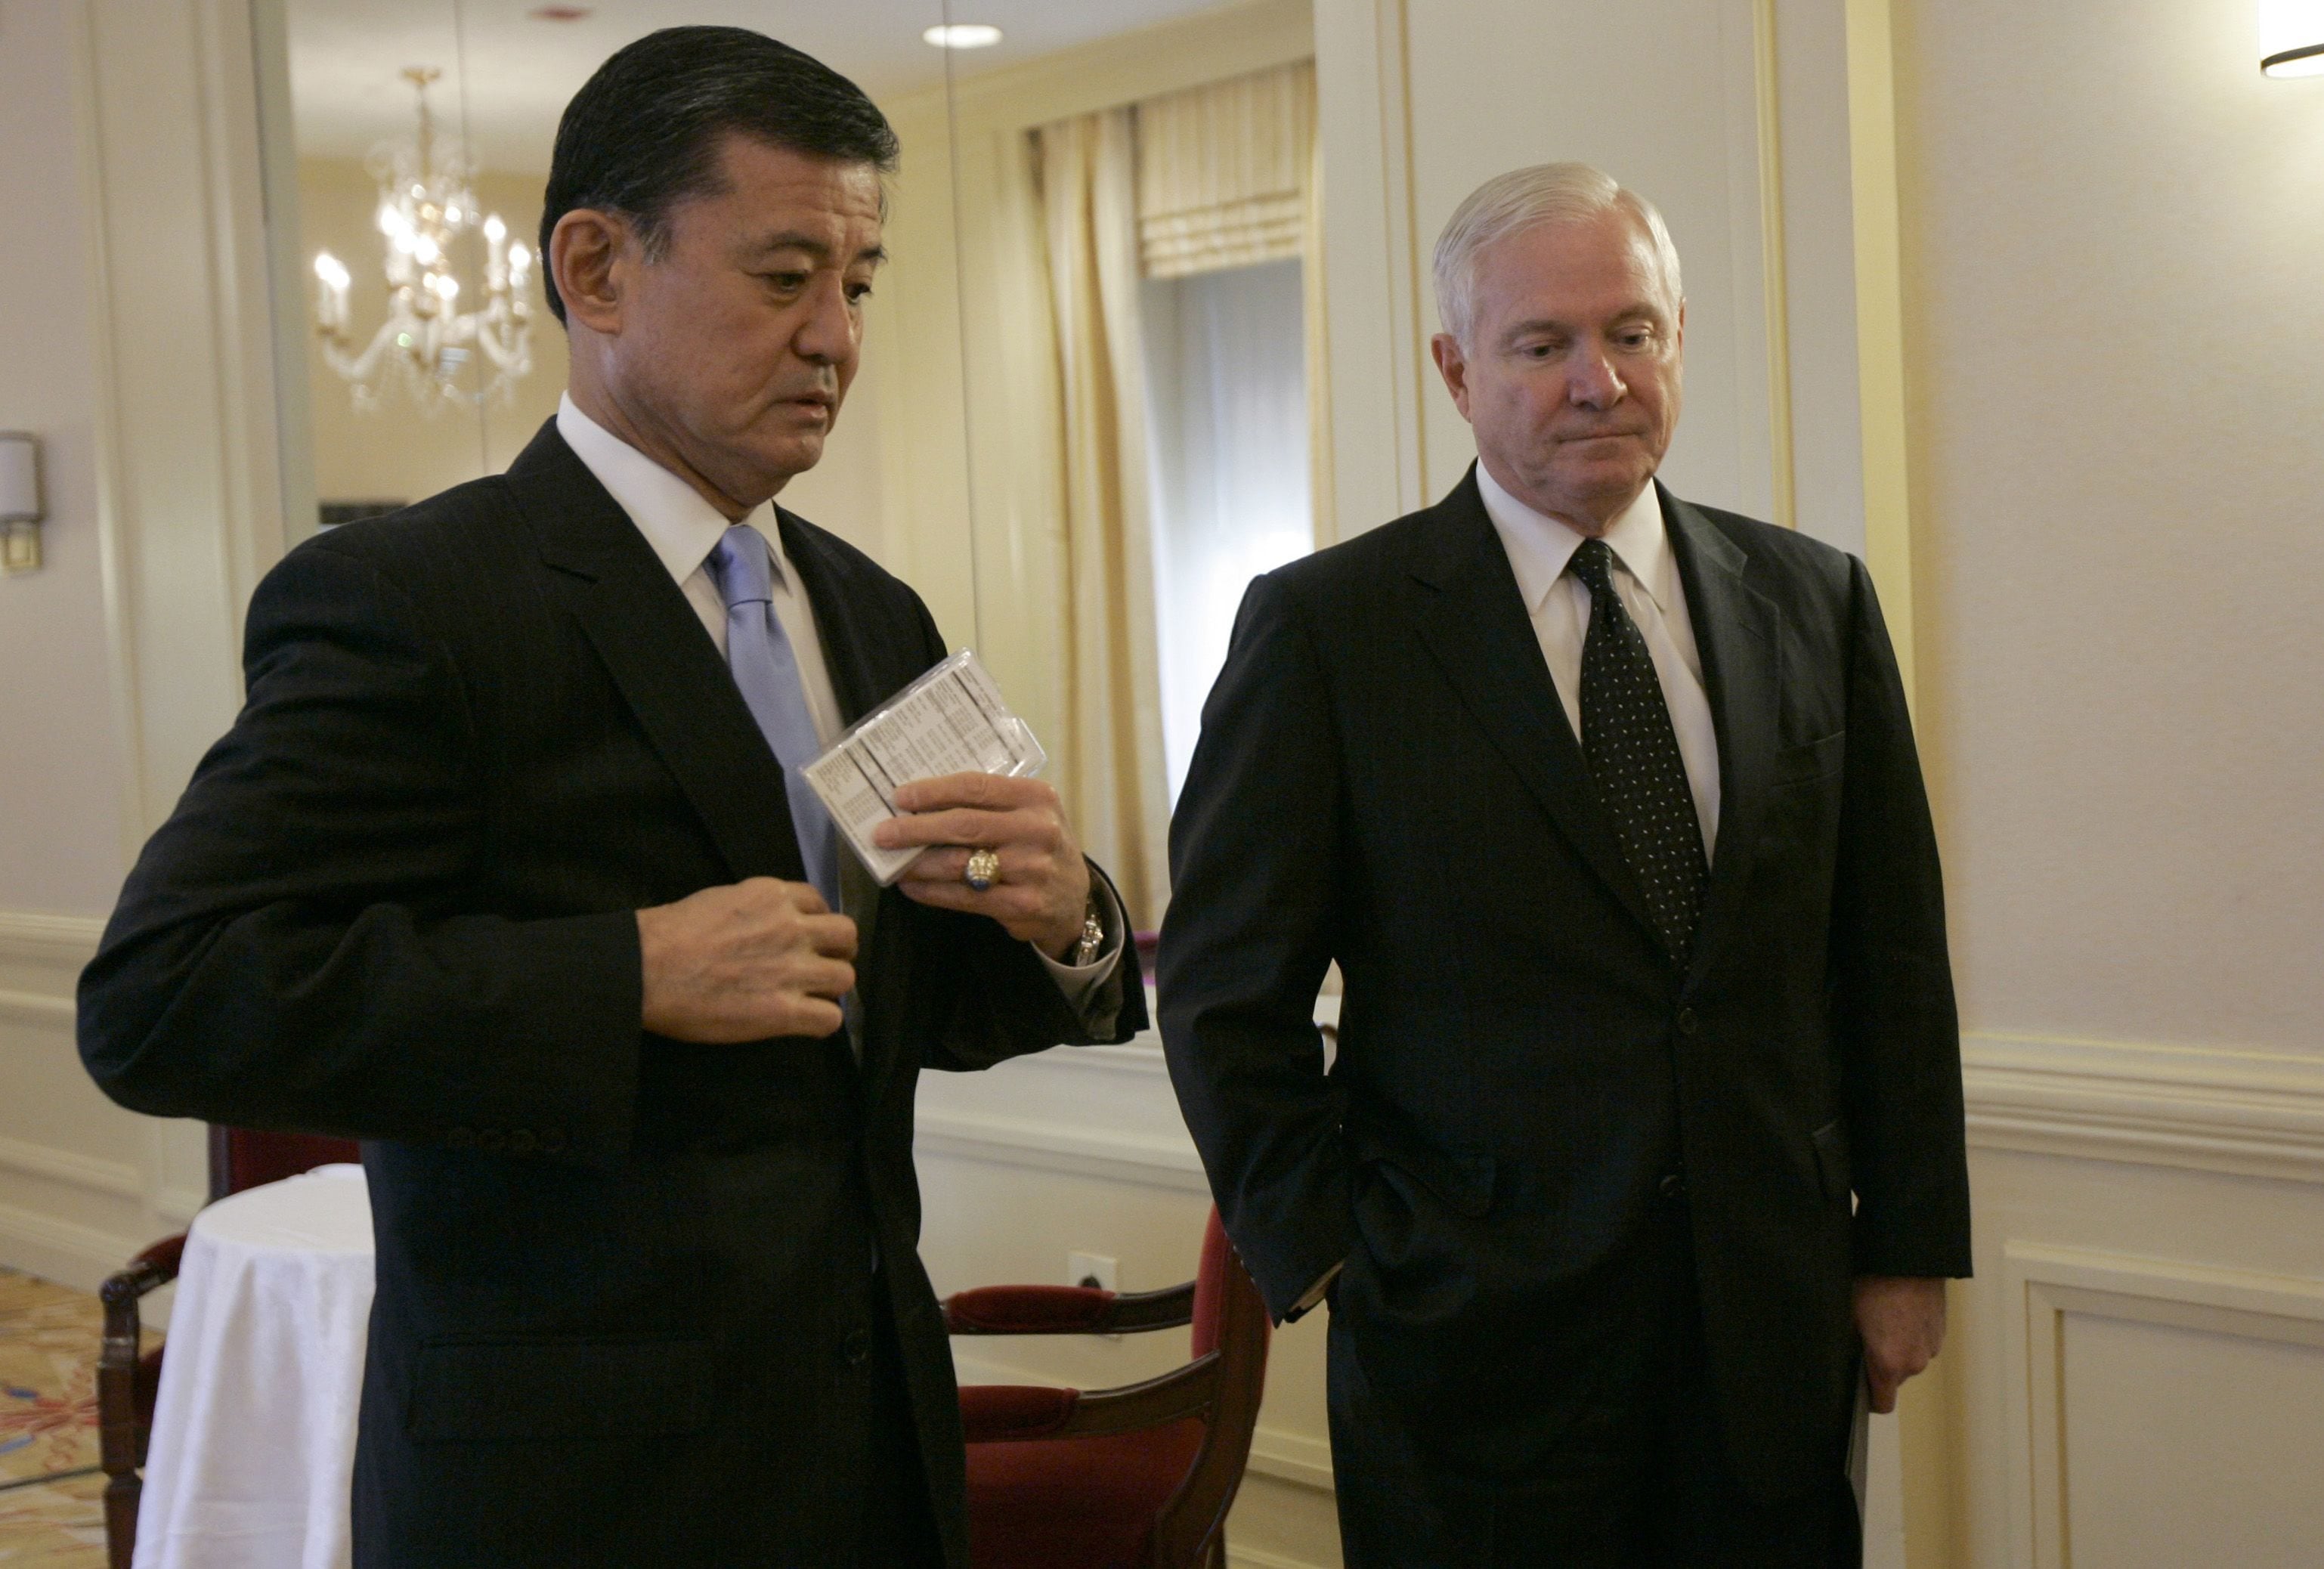 Defense Secretary Robert Gates, right, and Veterans Affairs Secretary Eric Shinseki wait to speak in 2009 at a Mental Health Summit to discuss a public health model for enhanced health care for returning service members in Washington.